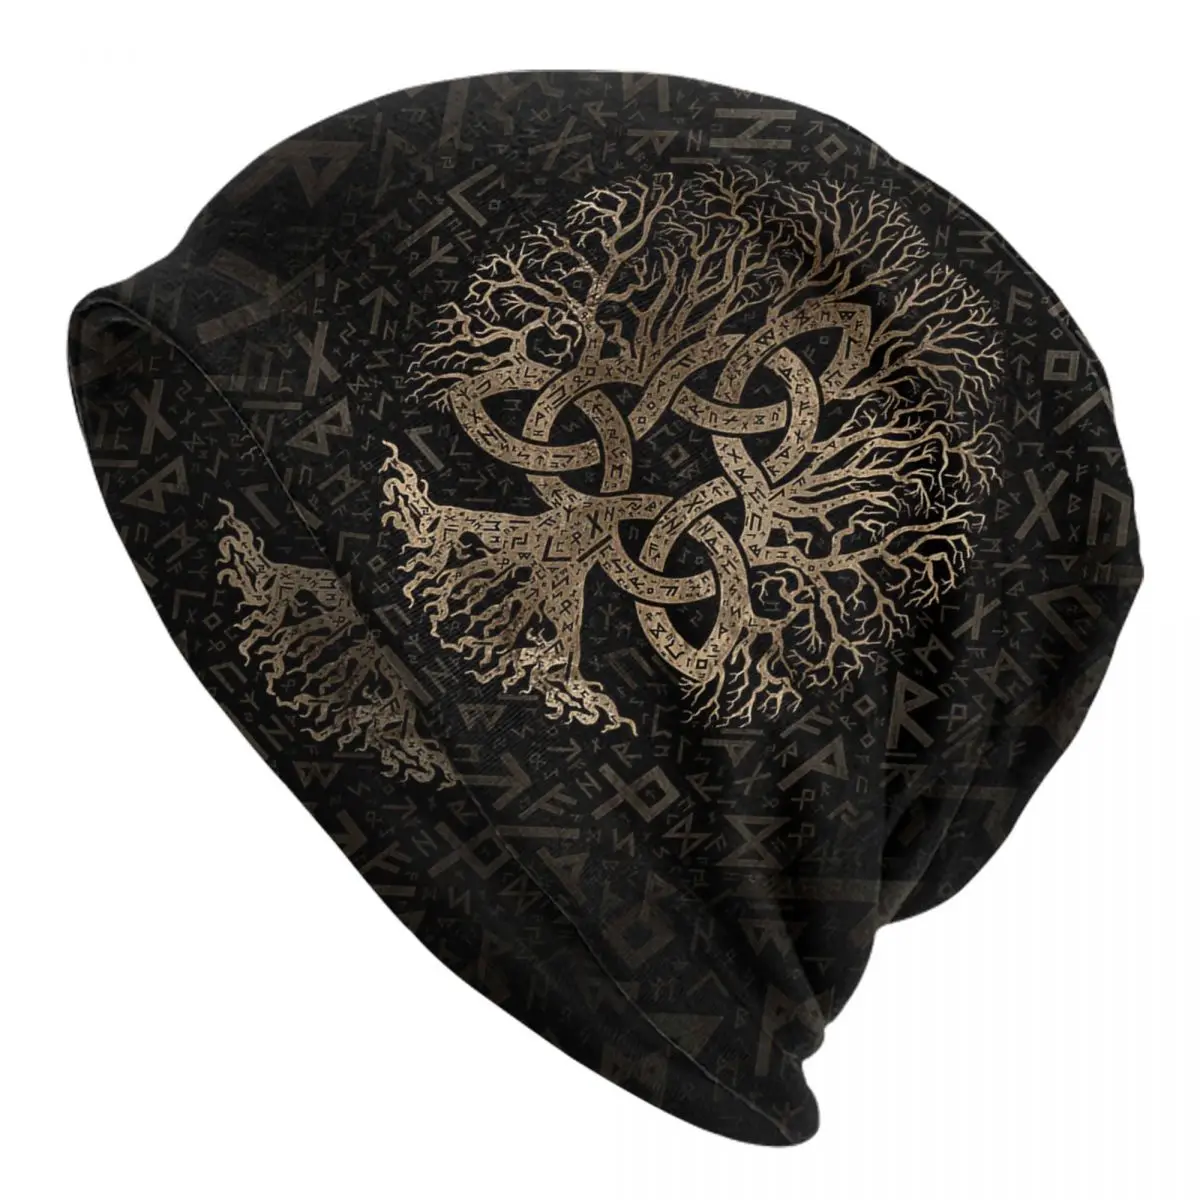 Tree Of Life With Triquetra On Futhark Pattern Adult Men's Women's Knit Hat Keep warm winter knitted hat